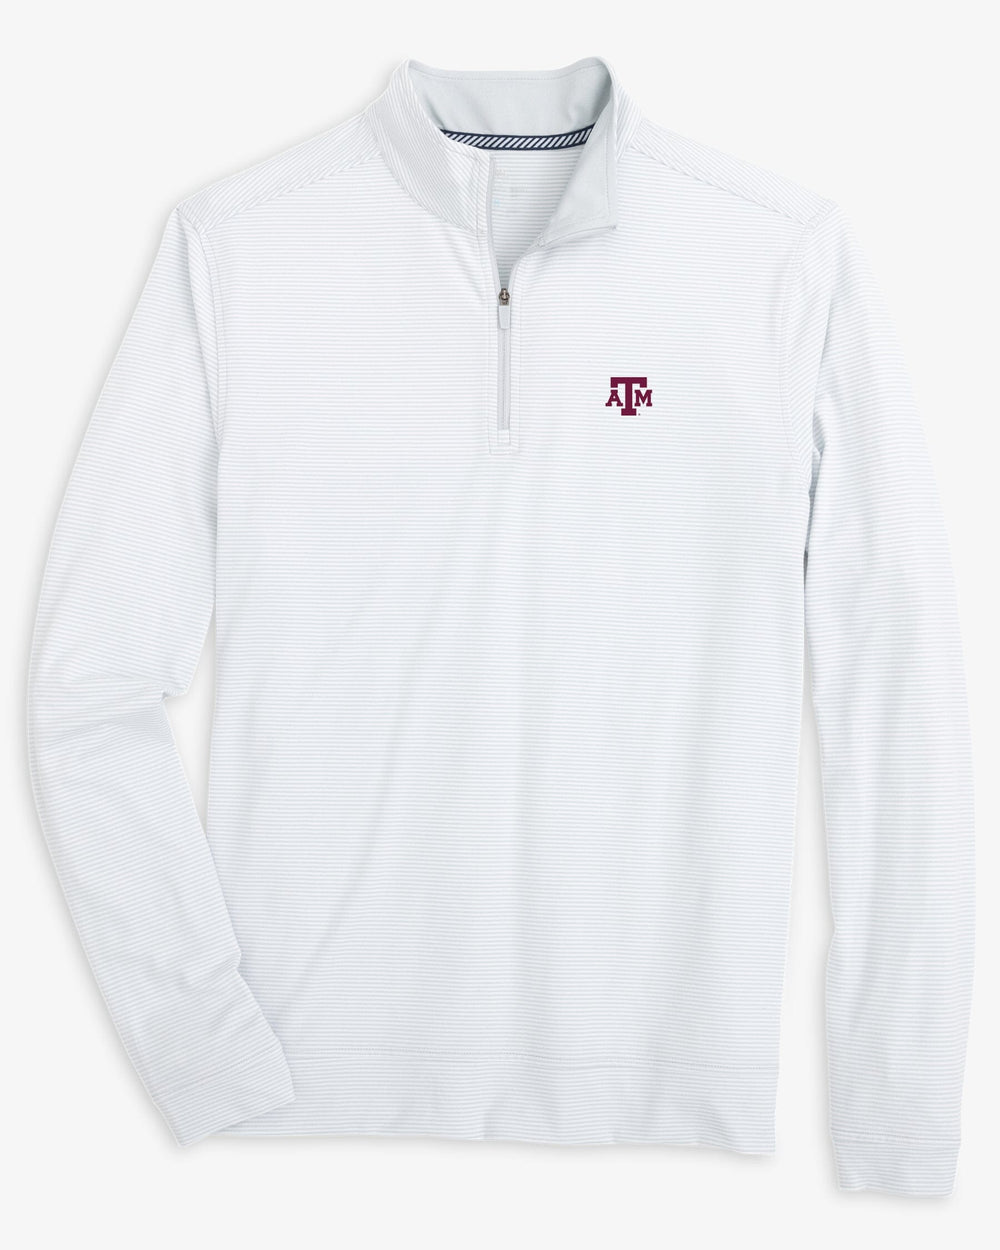 The front view of the Texas A&M Aggies Cruiser Micro-Stripe Heather Quarter Zip by Southern Tide - Heather Slate Grey